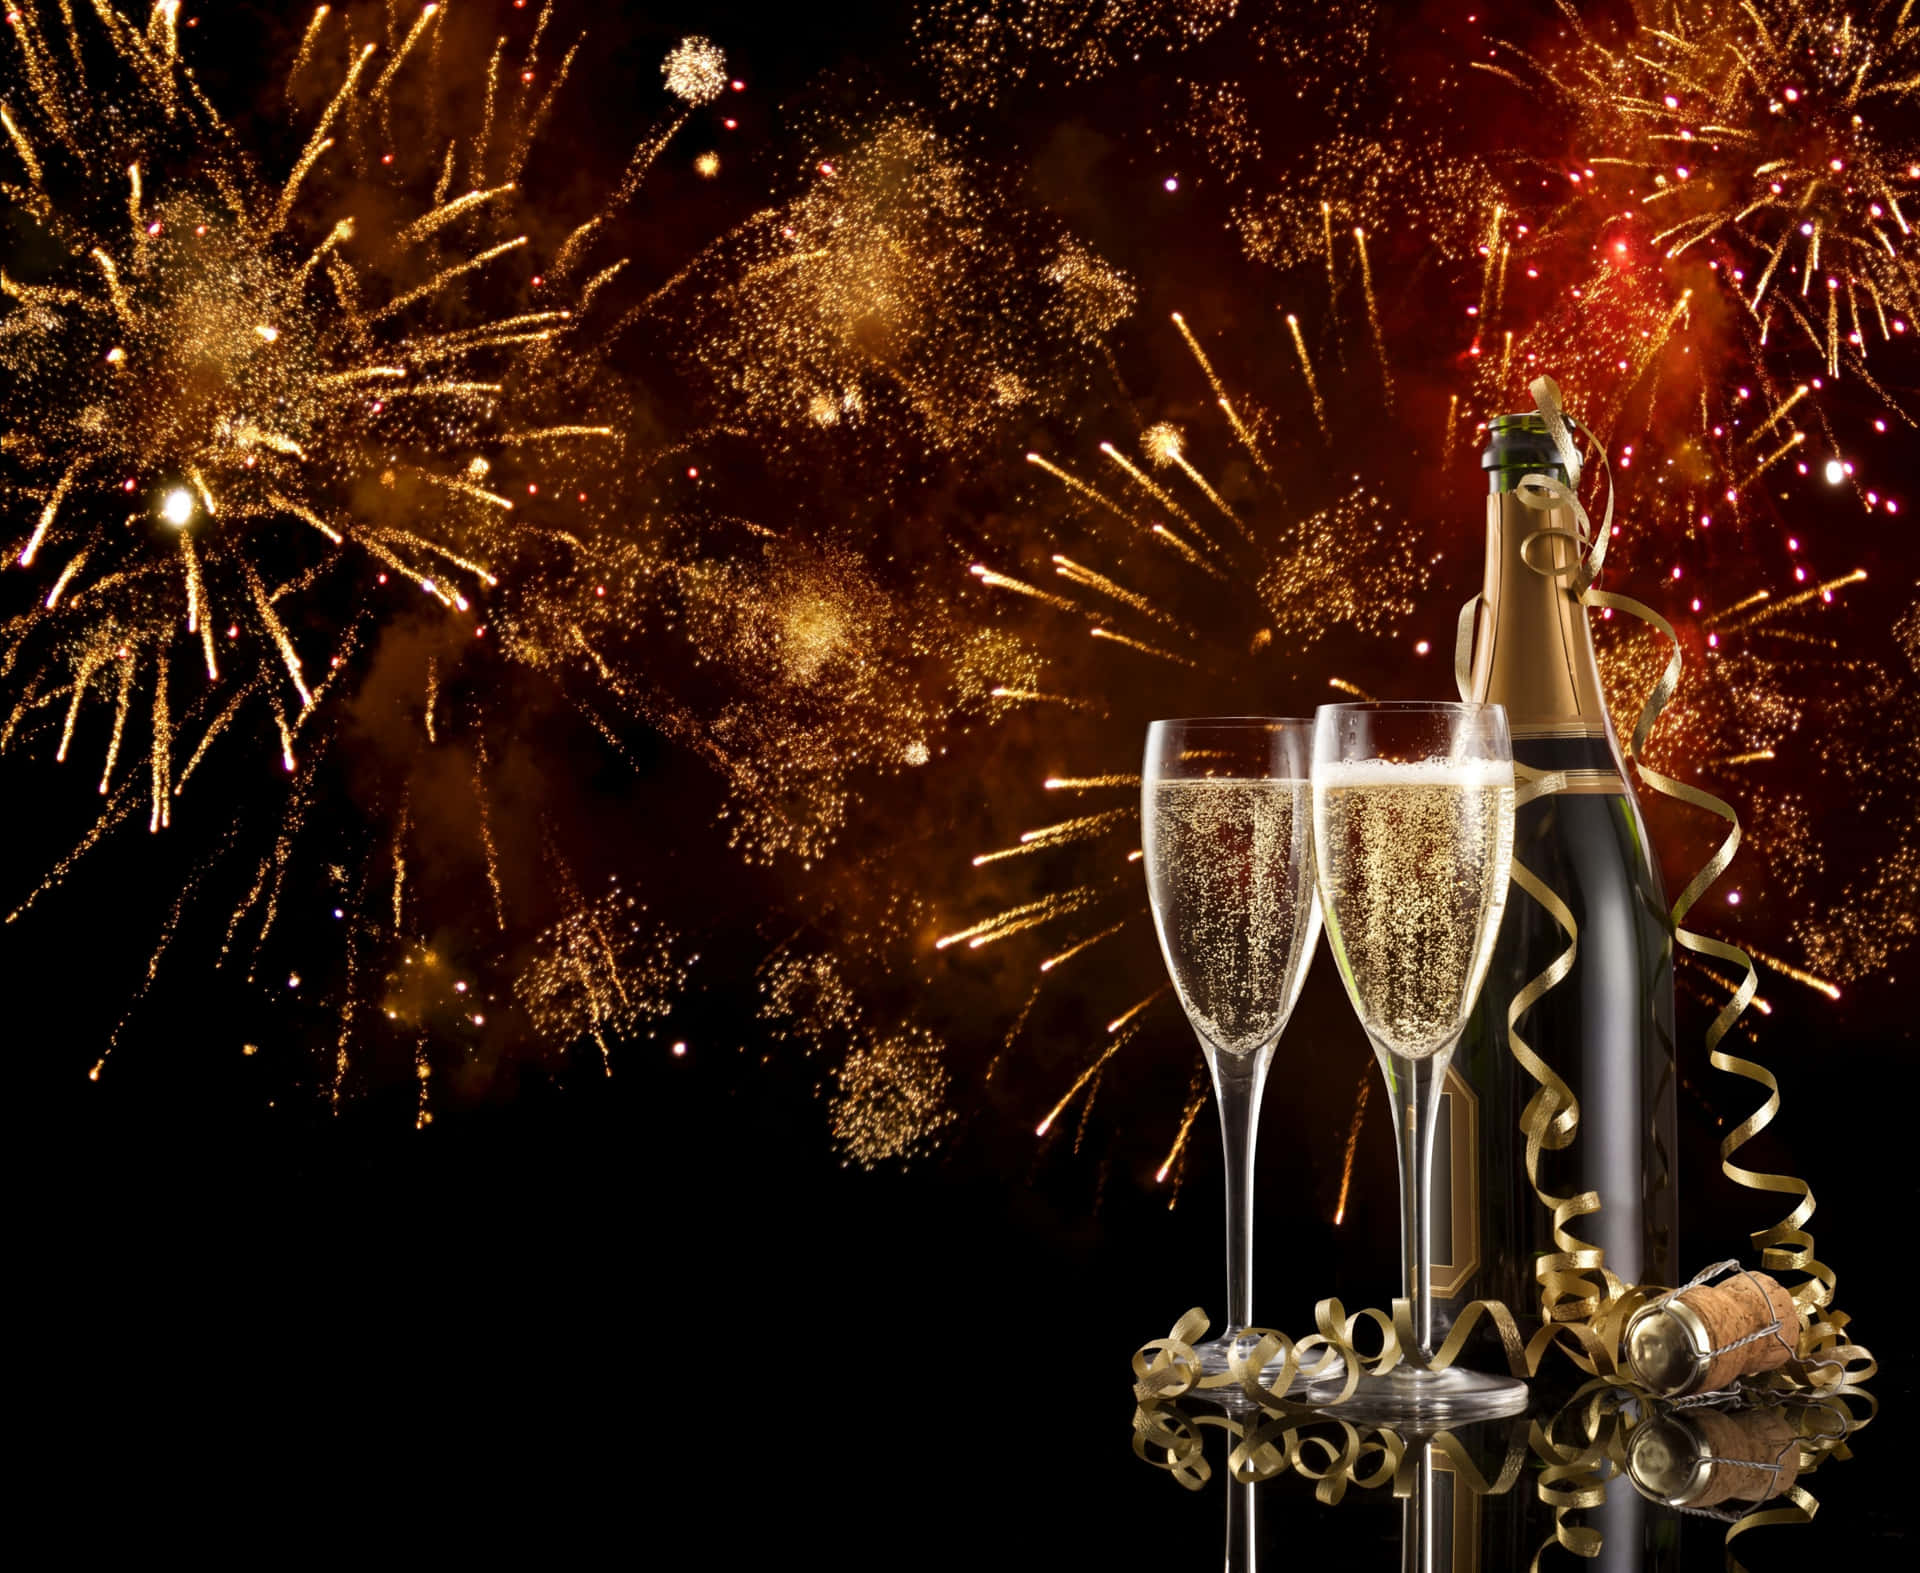 Champagne Bottle And Glasses With Fireworks